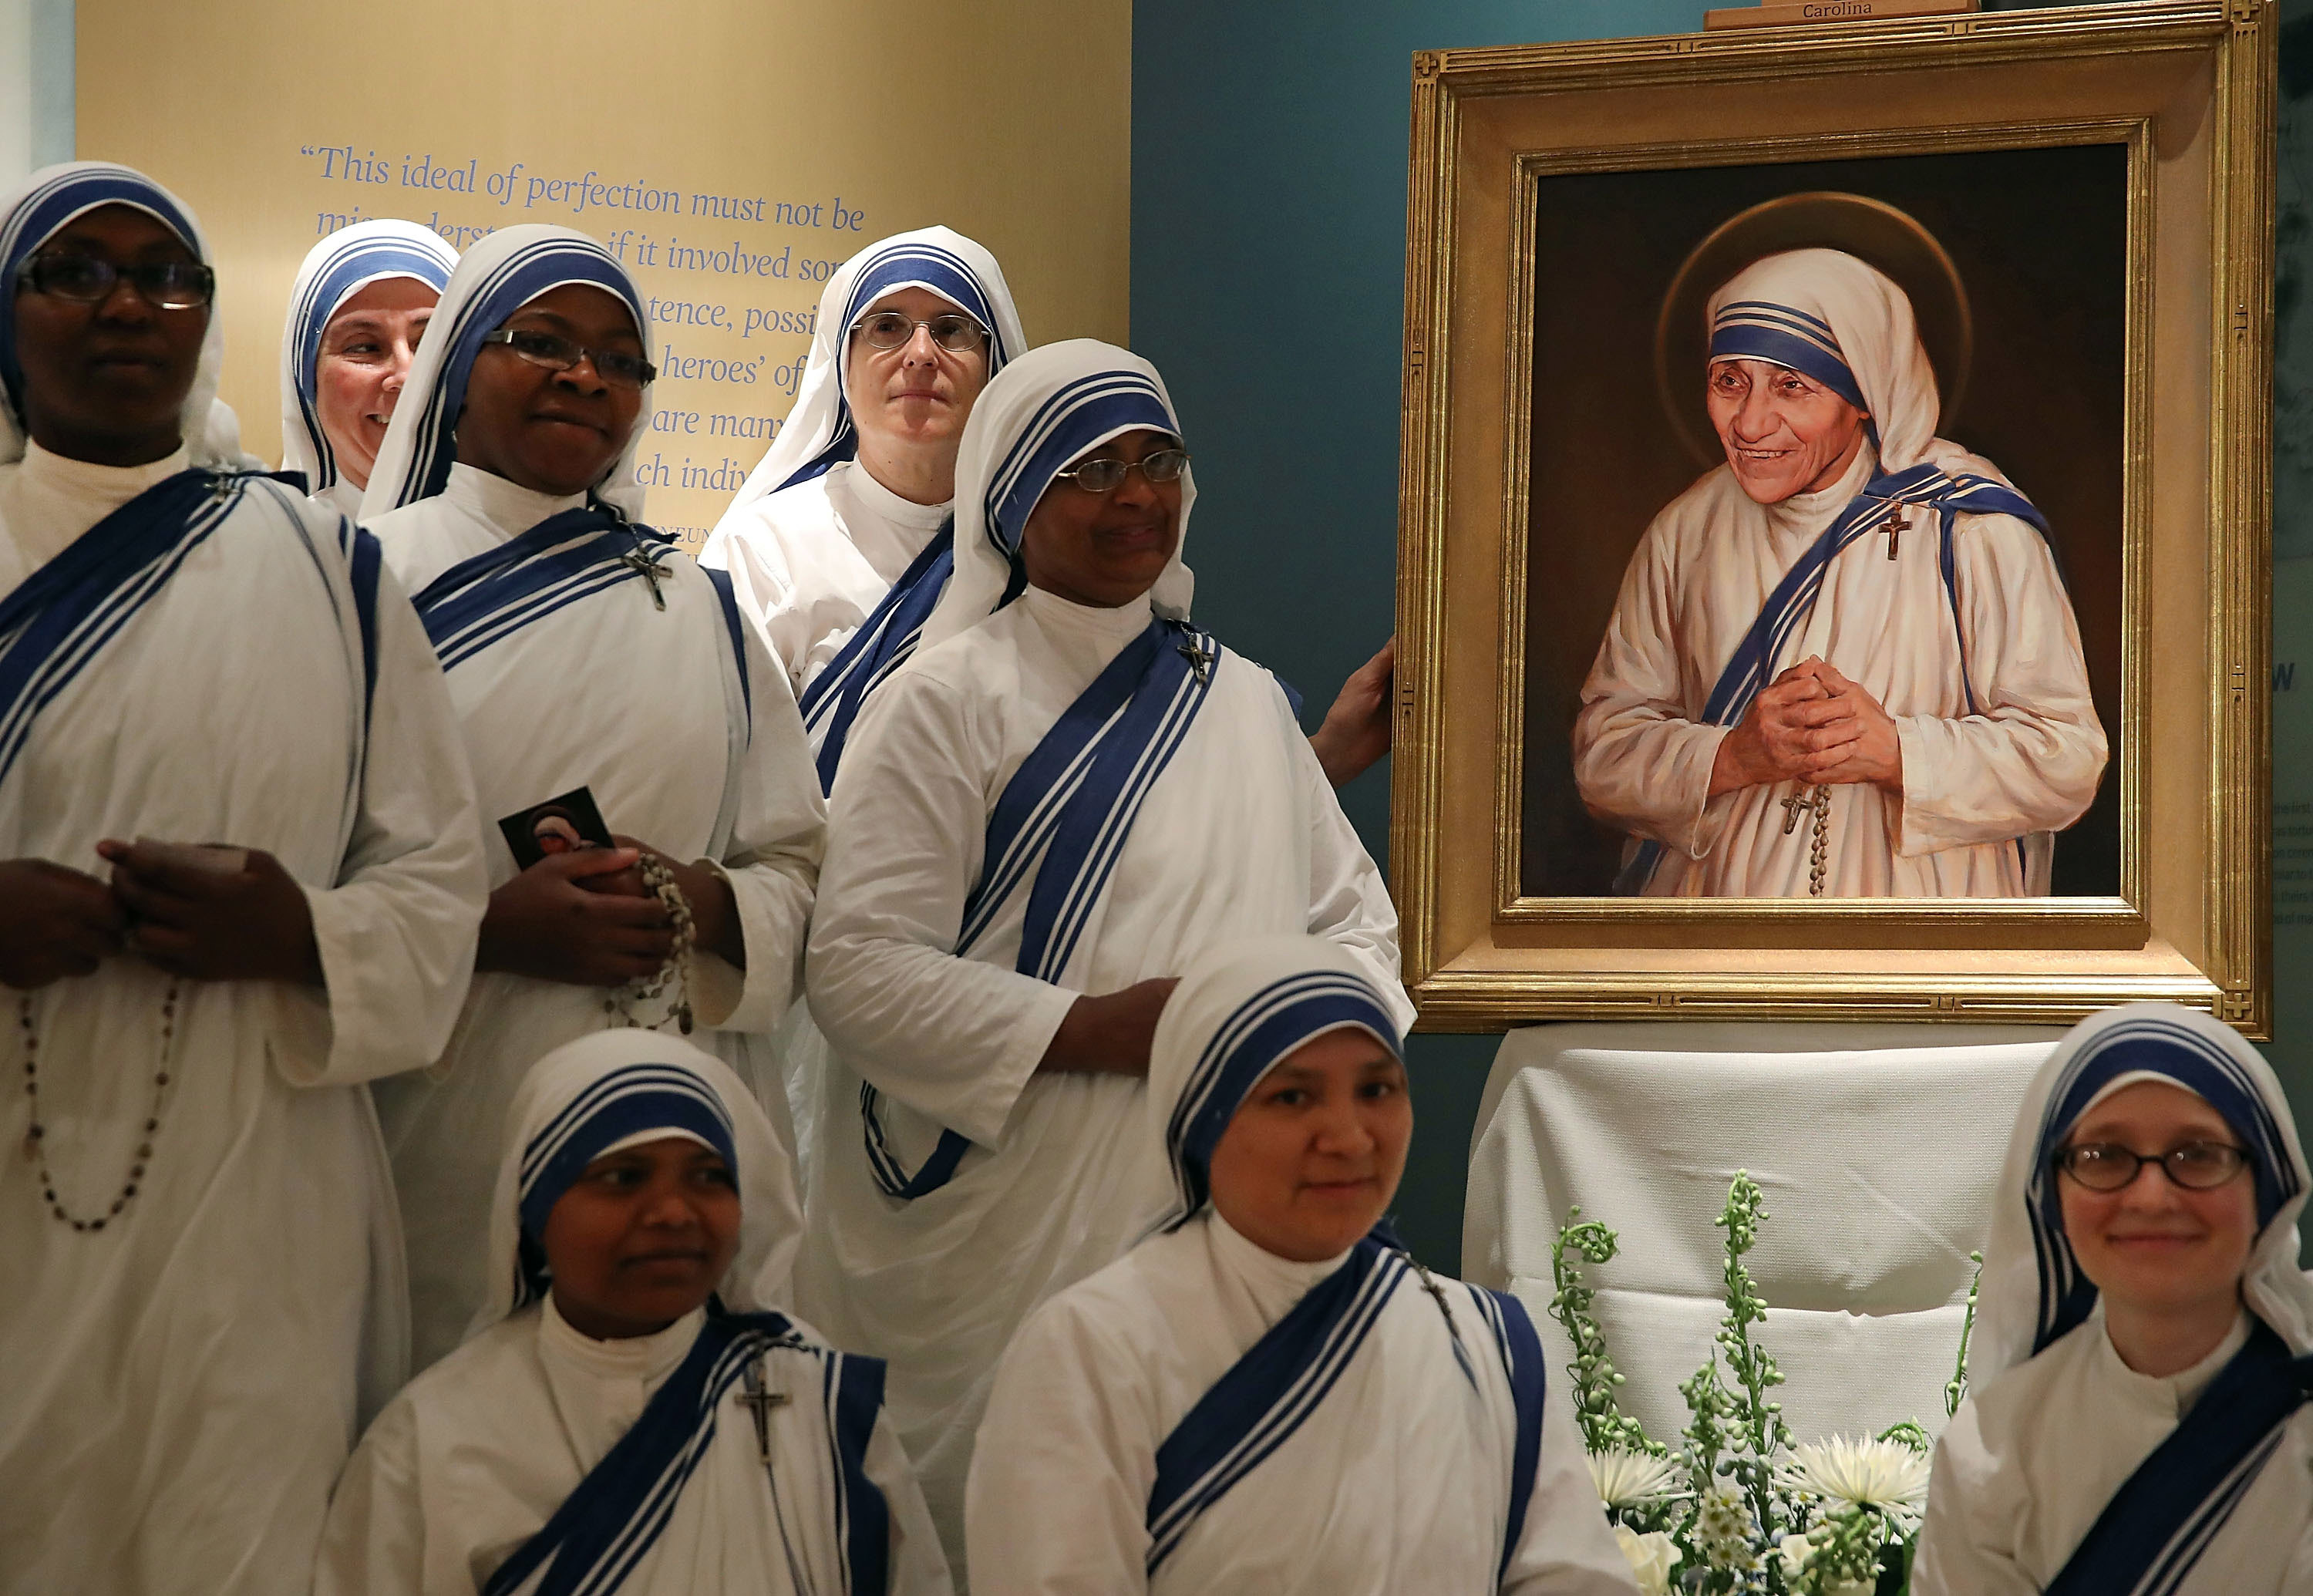 Sisters of the Missionaries of Charity stand in front of the official canonisation portrait of Mother Teresa.